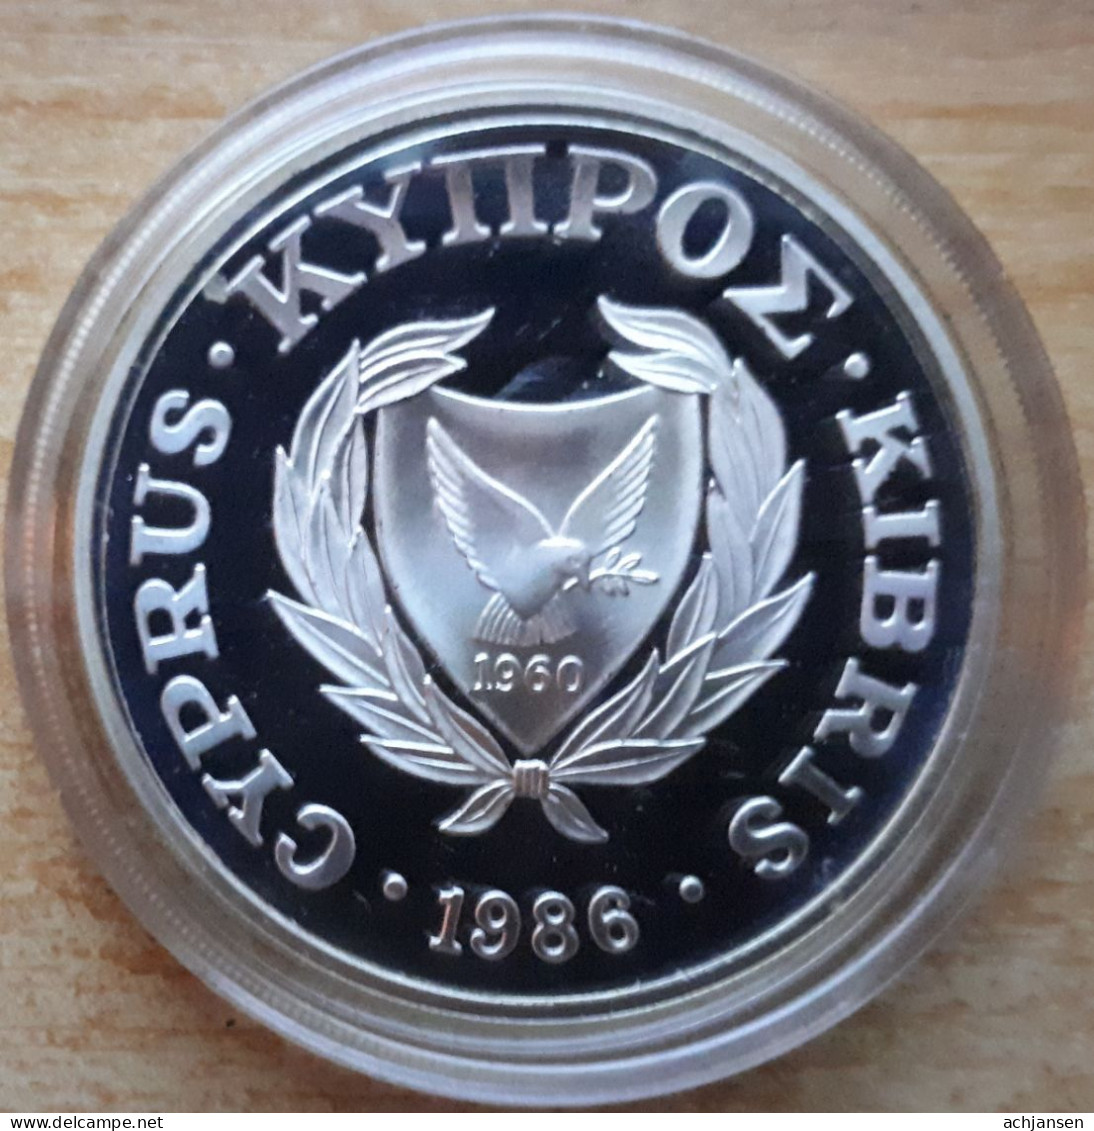 Cyprus, 1 Pound 1986 - Silver Proof - Chipre